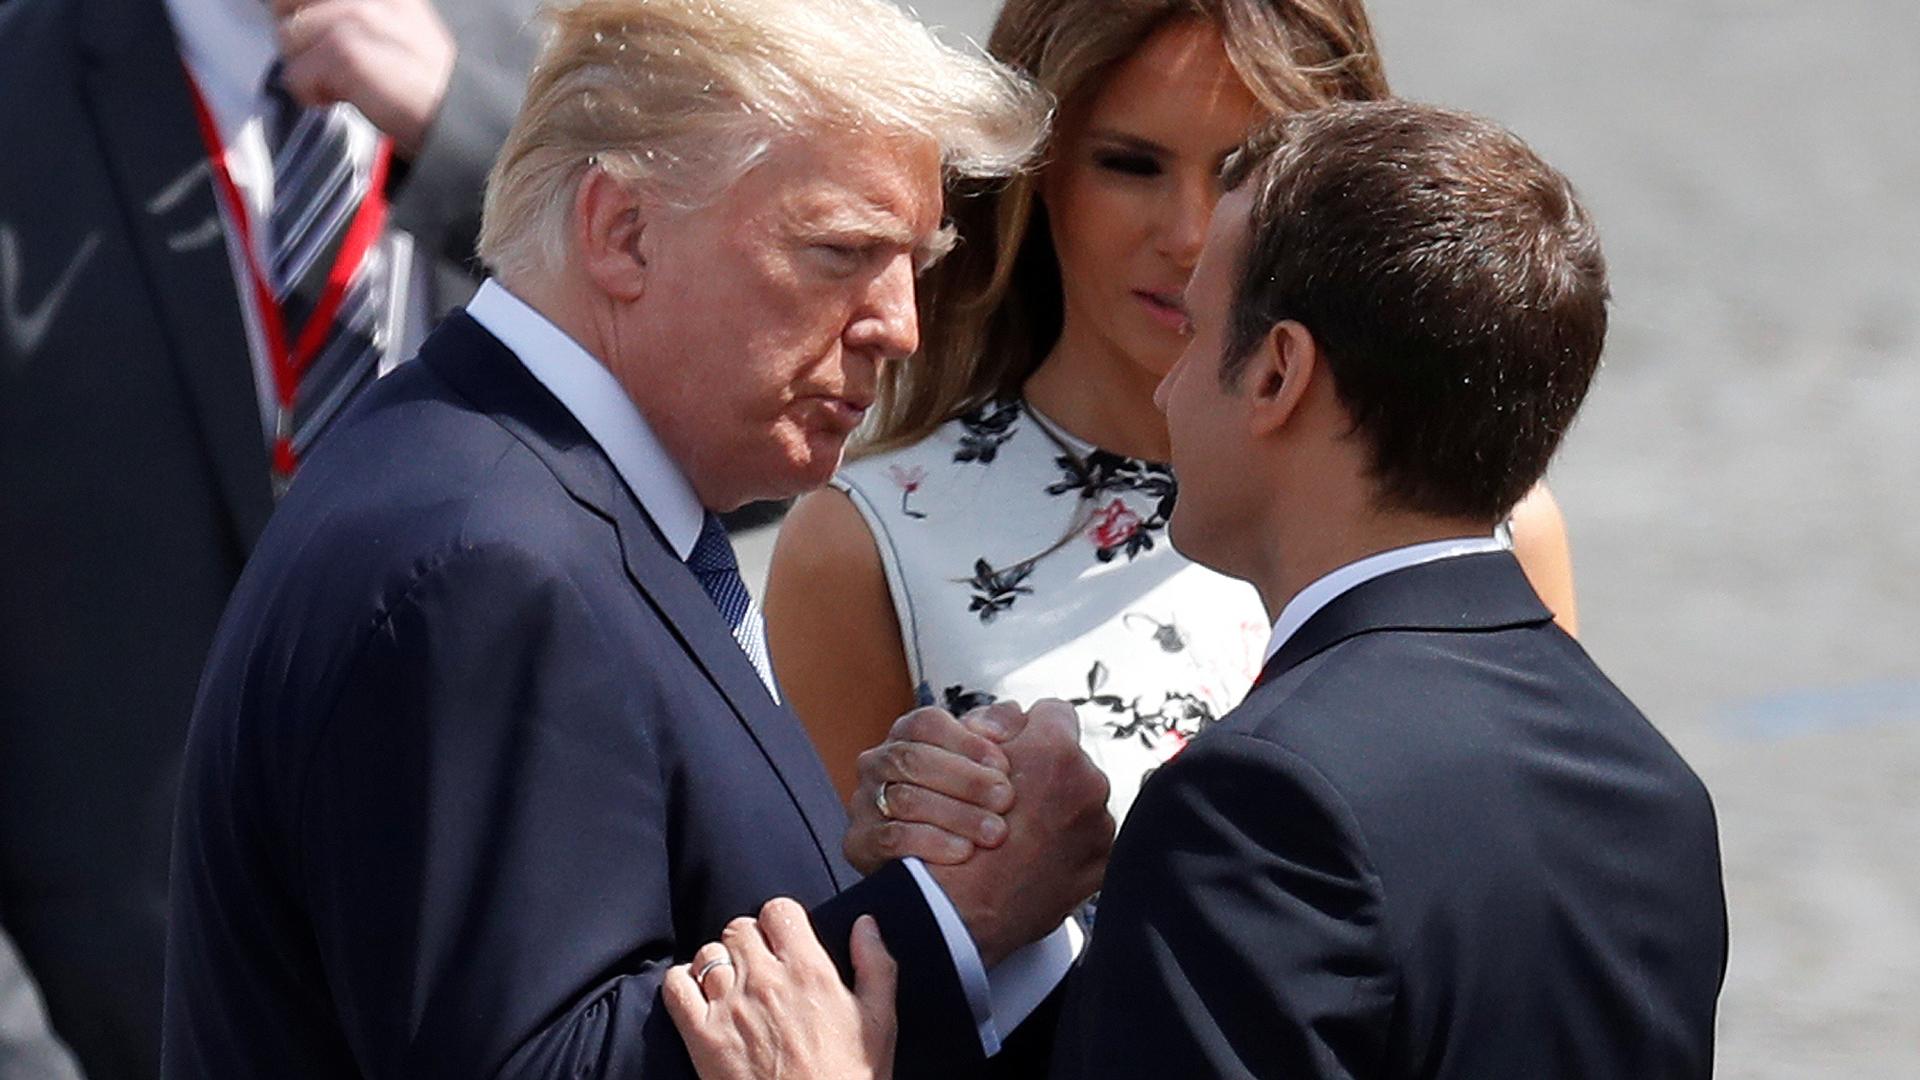 French President Emmanuel Macron shakes hands with US President Donald Trump in Paris, July 14, 2017.